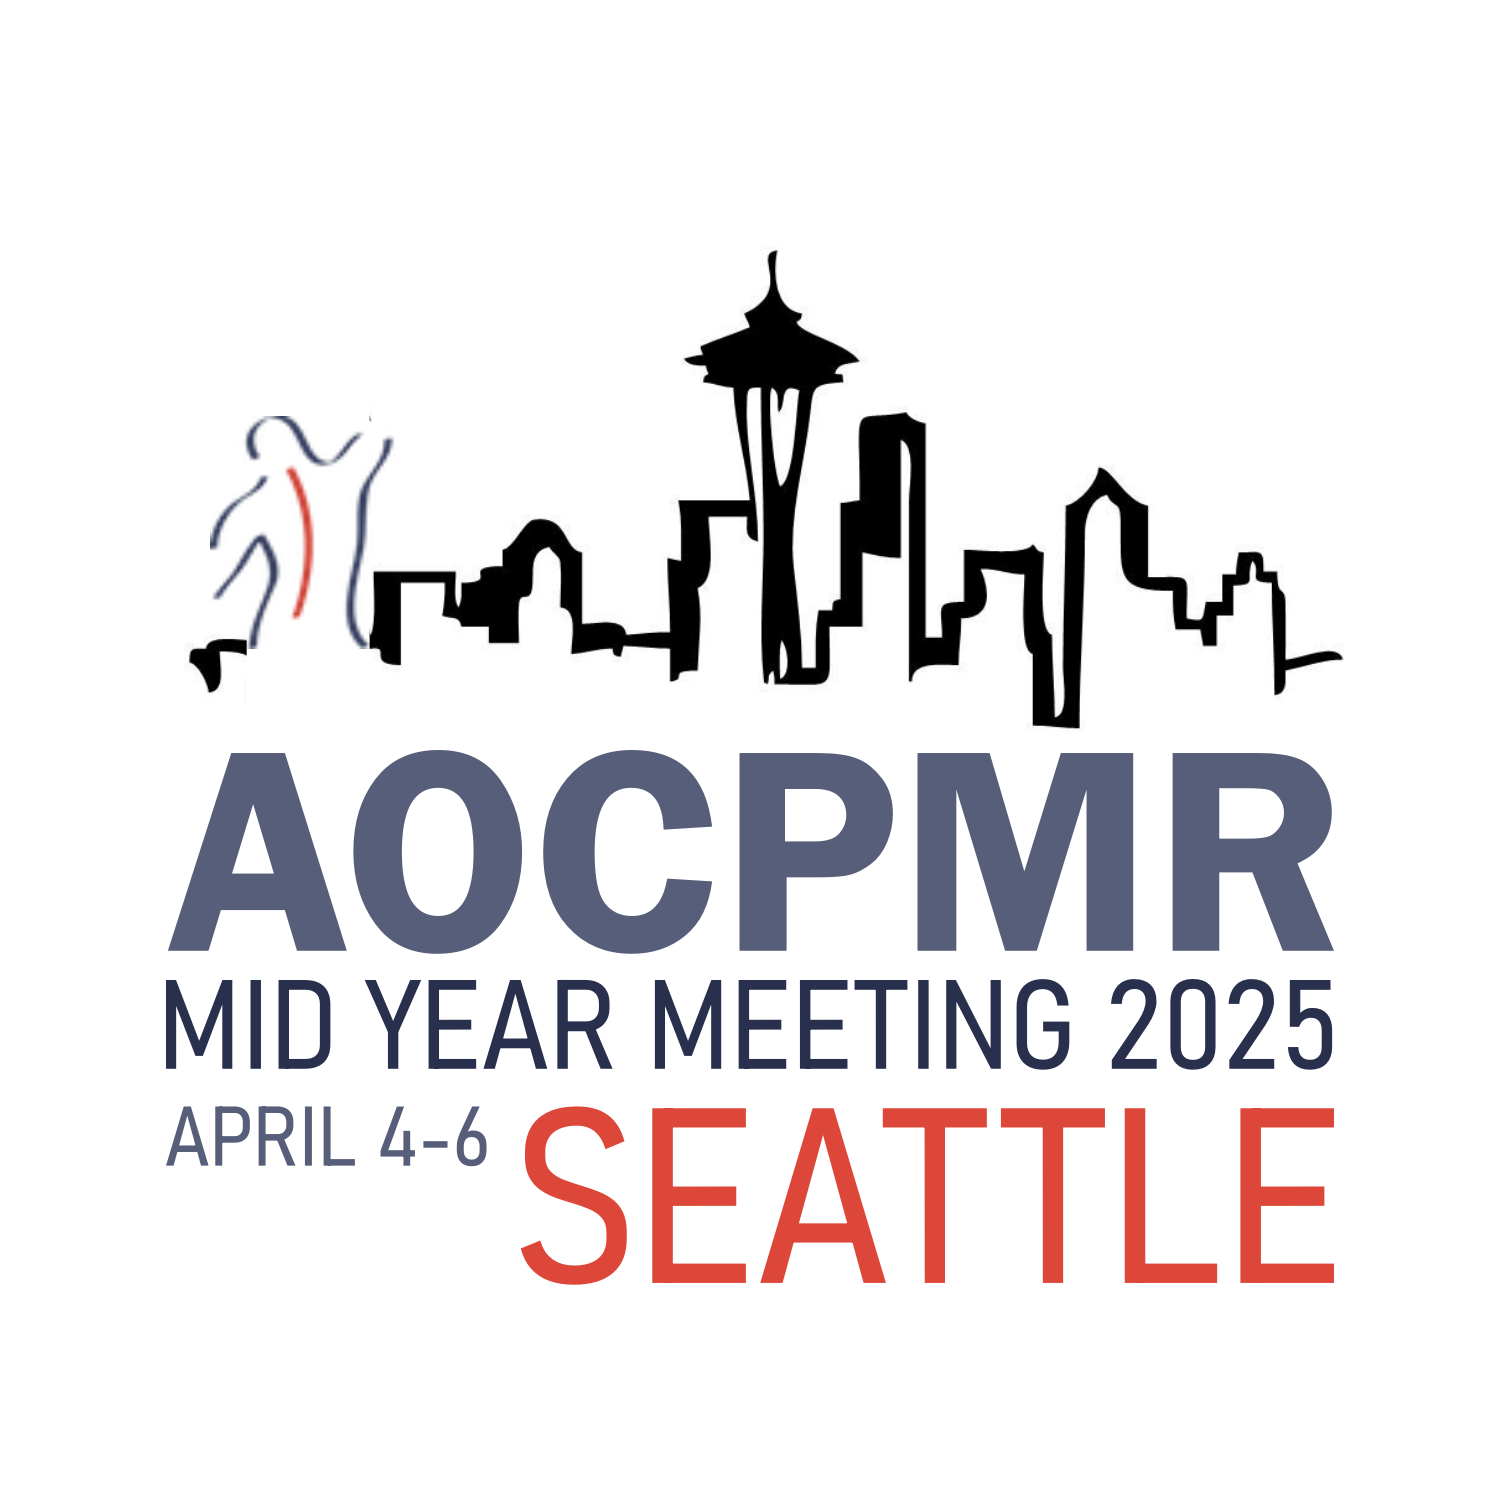 2025 Mid Year Meeting April 4-6 Seattle